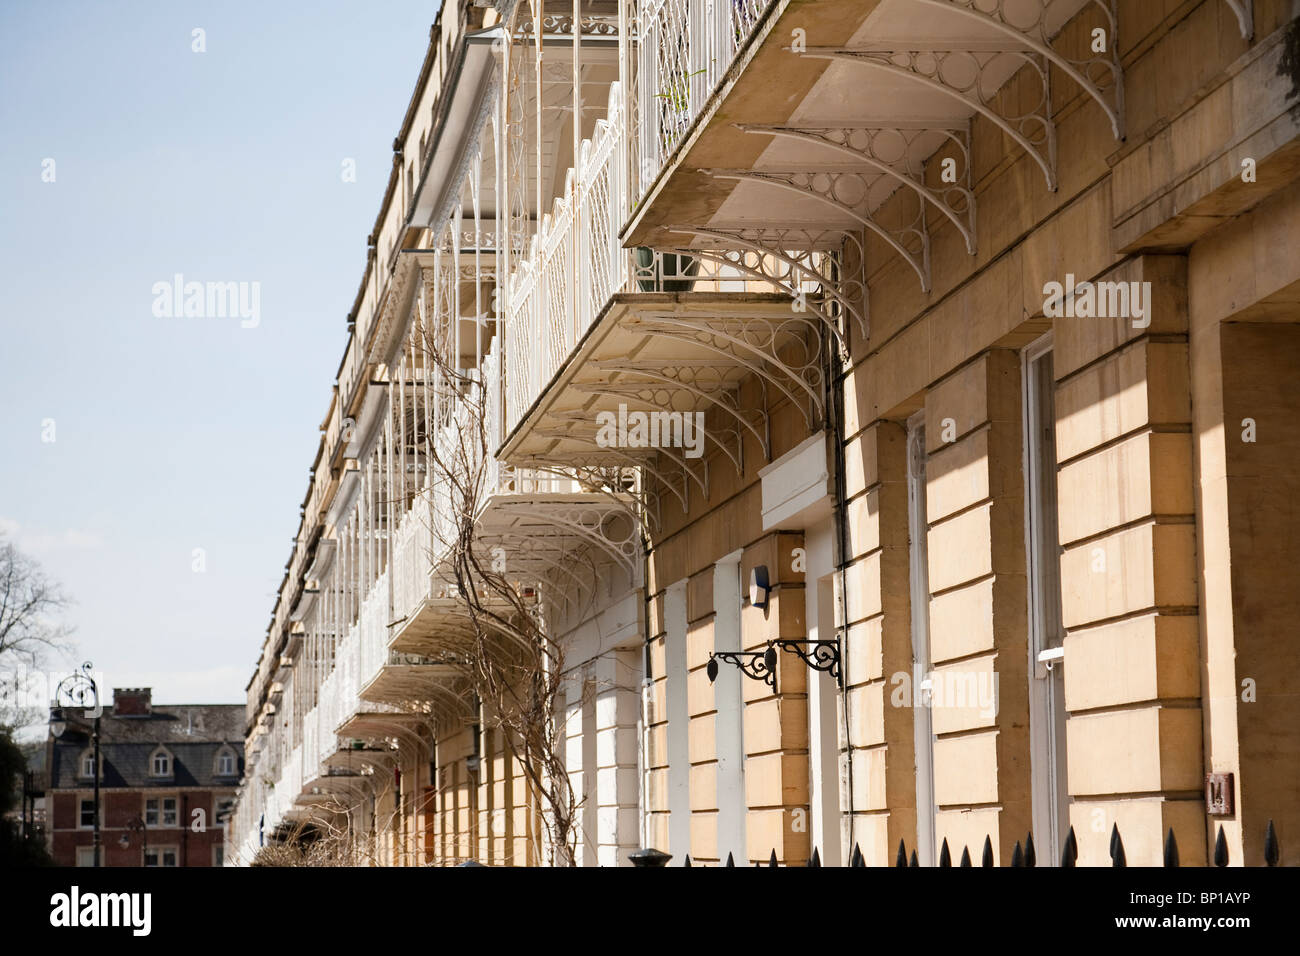 Covered balconies on terraced Georgian houses in Clifton, Bristol, England. Stock Photo